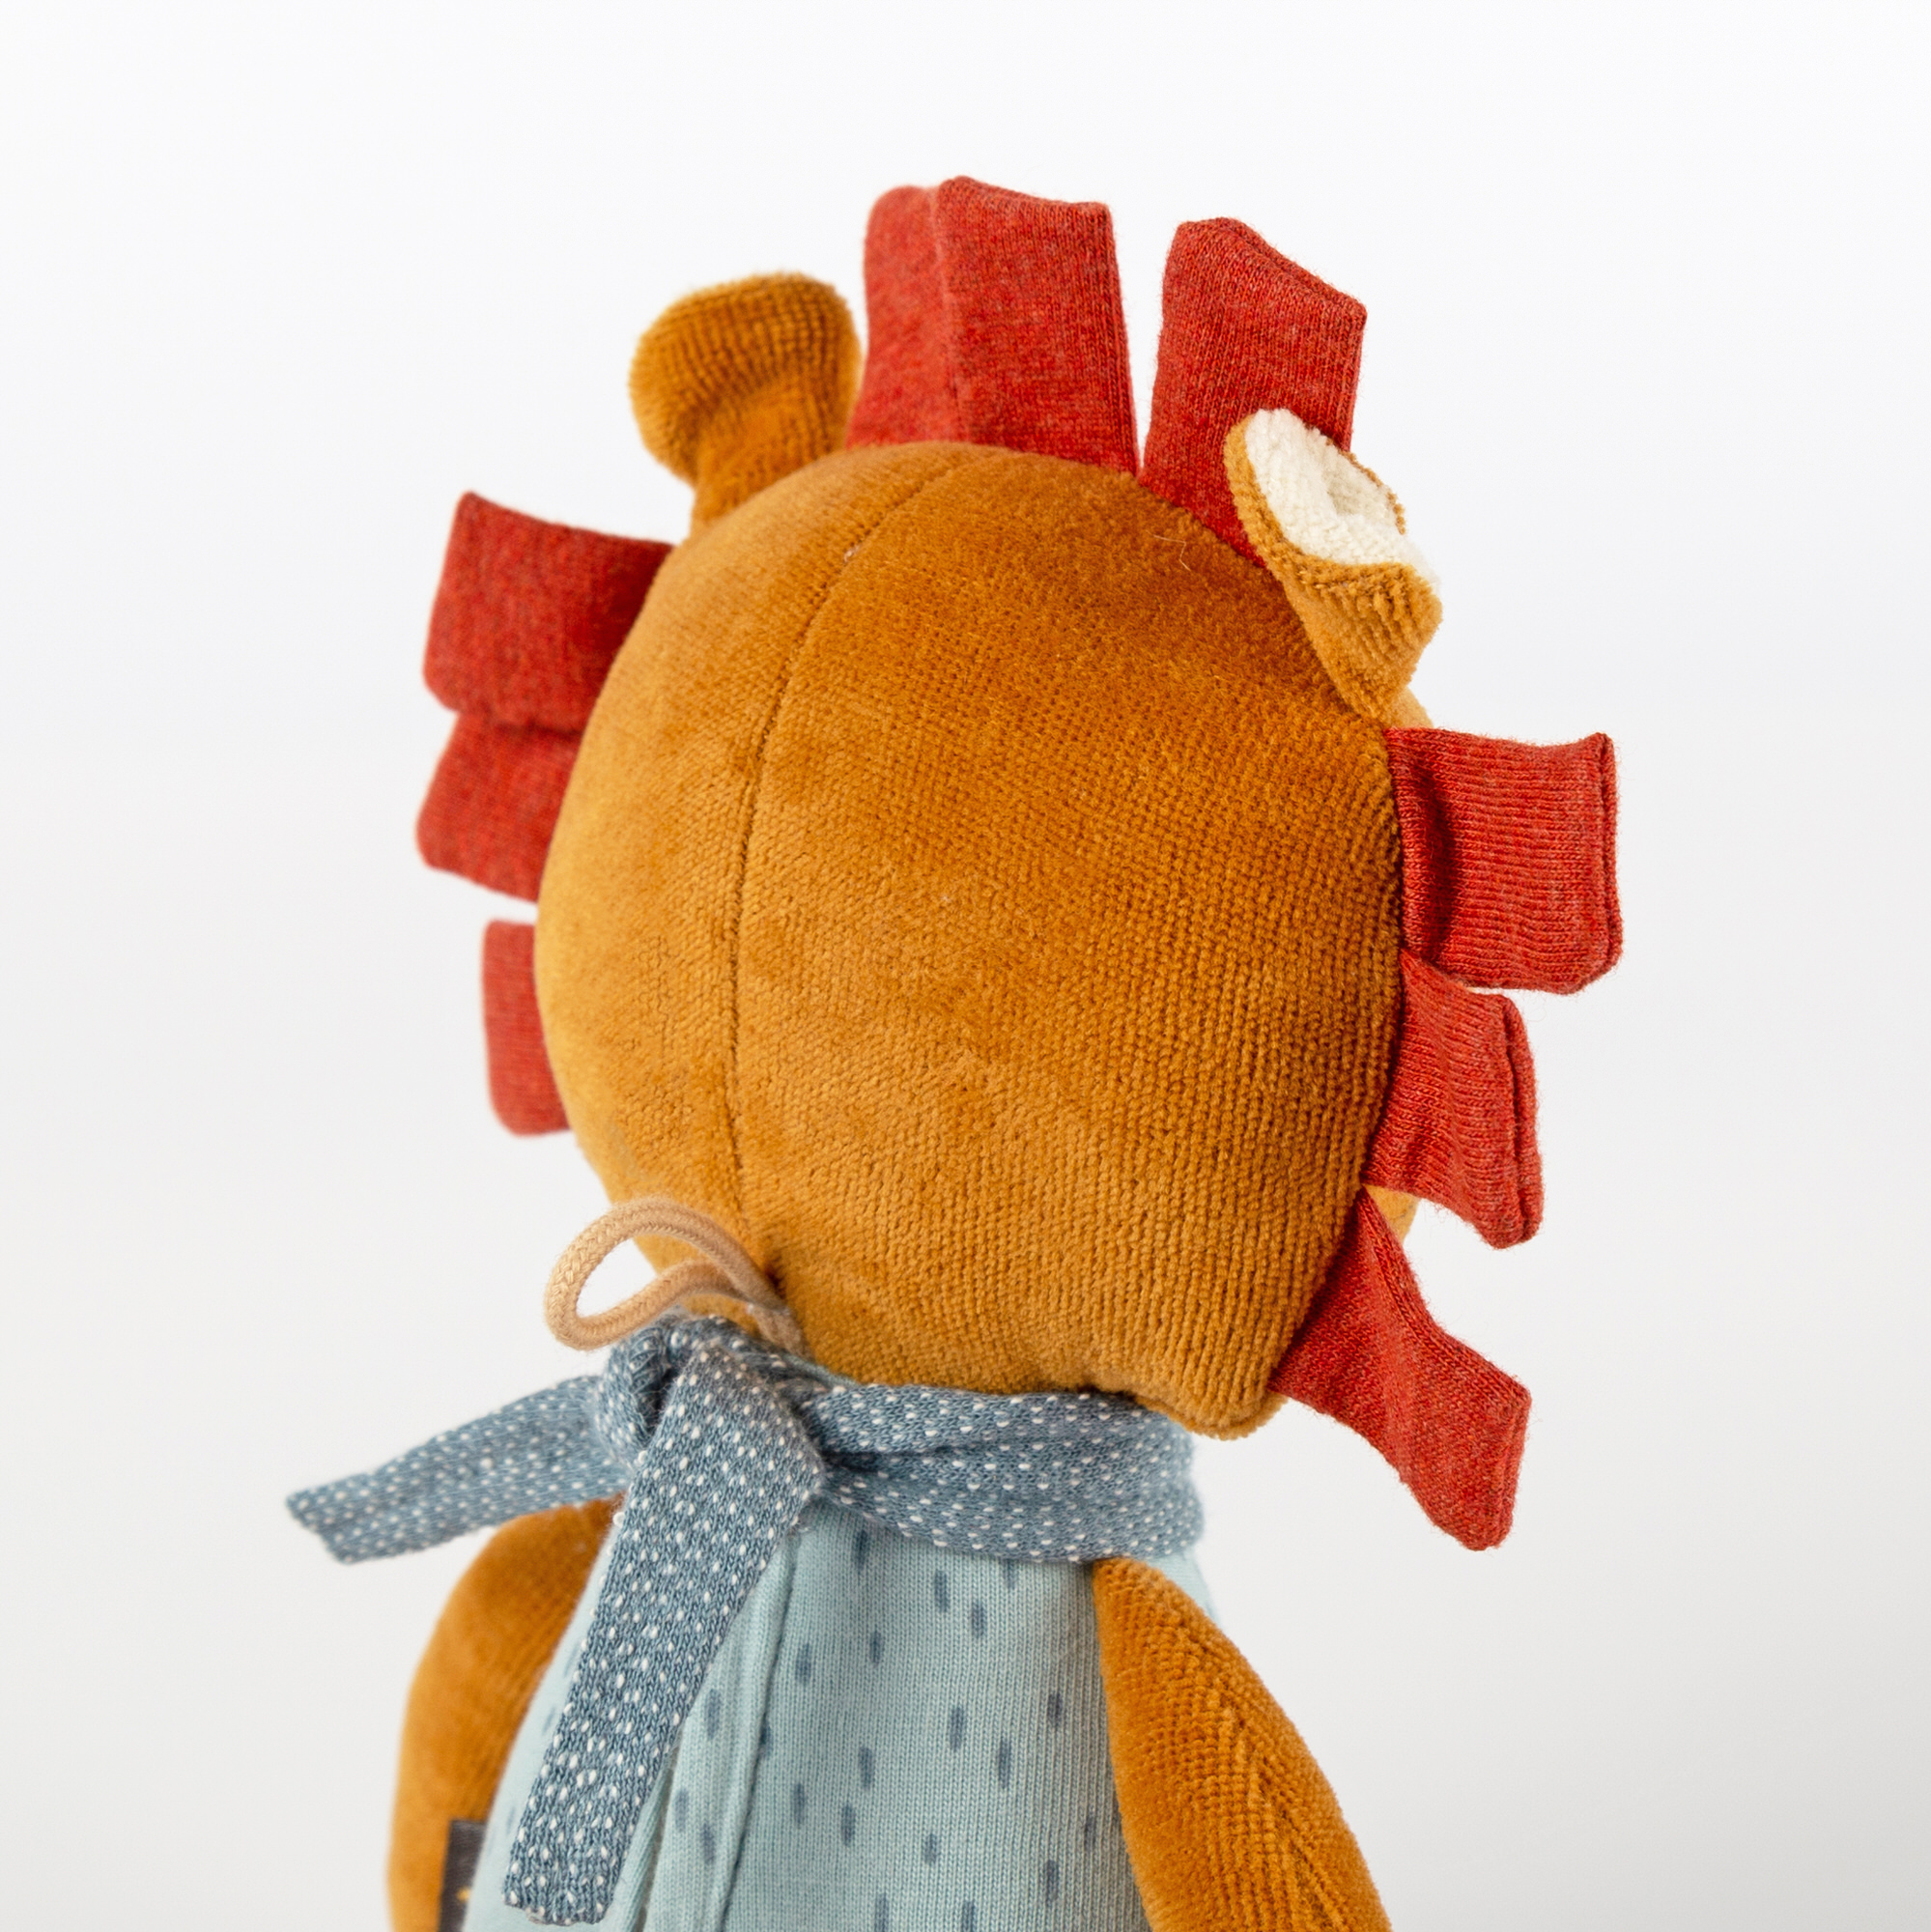 Musical baby soft toy lion